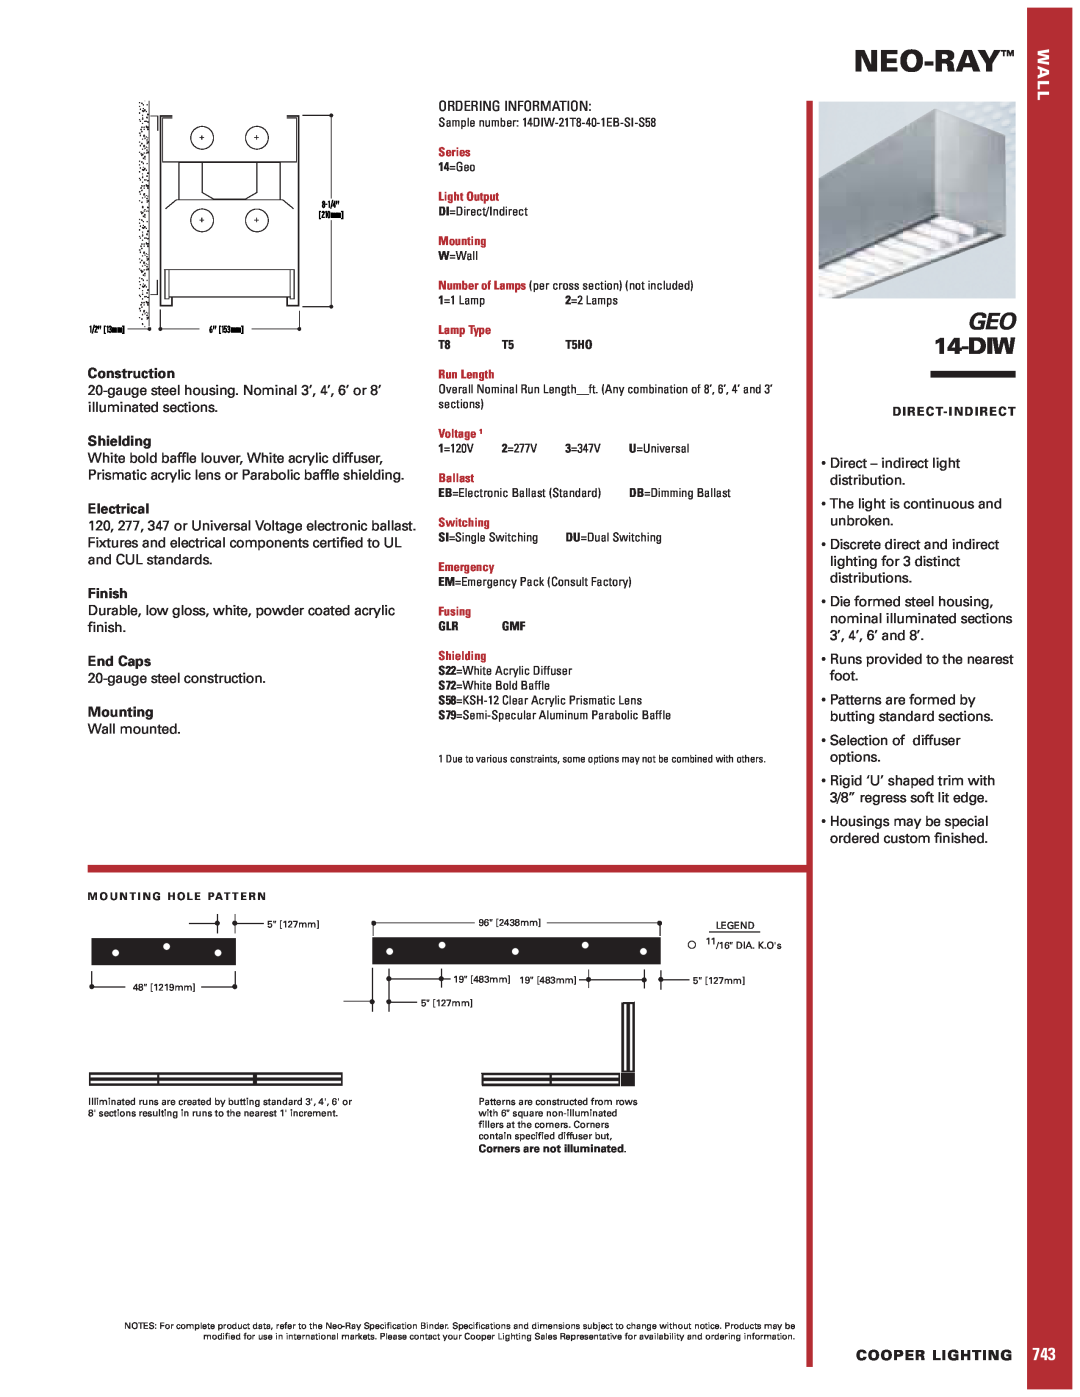 Cooper Lighting Geo 14-DIW specifications Neo-Ray, GEO 14-DIW, Construction, Shielding, Electrical, Finish, End Caps 